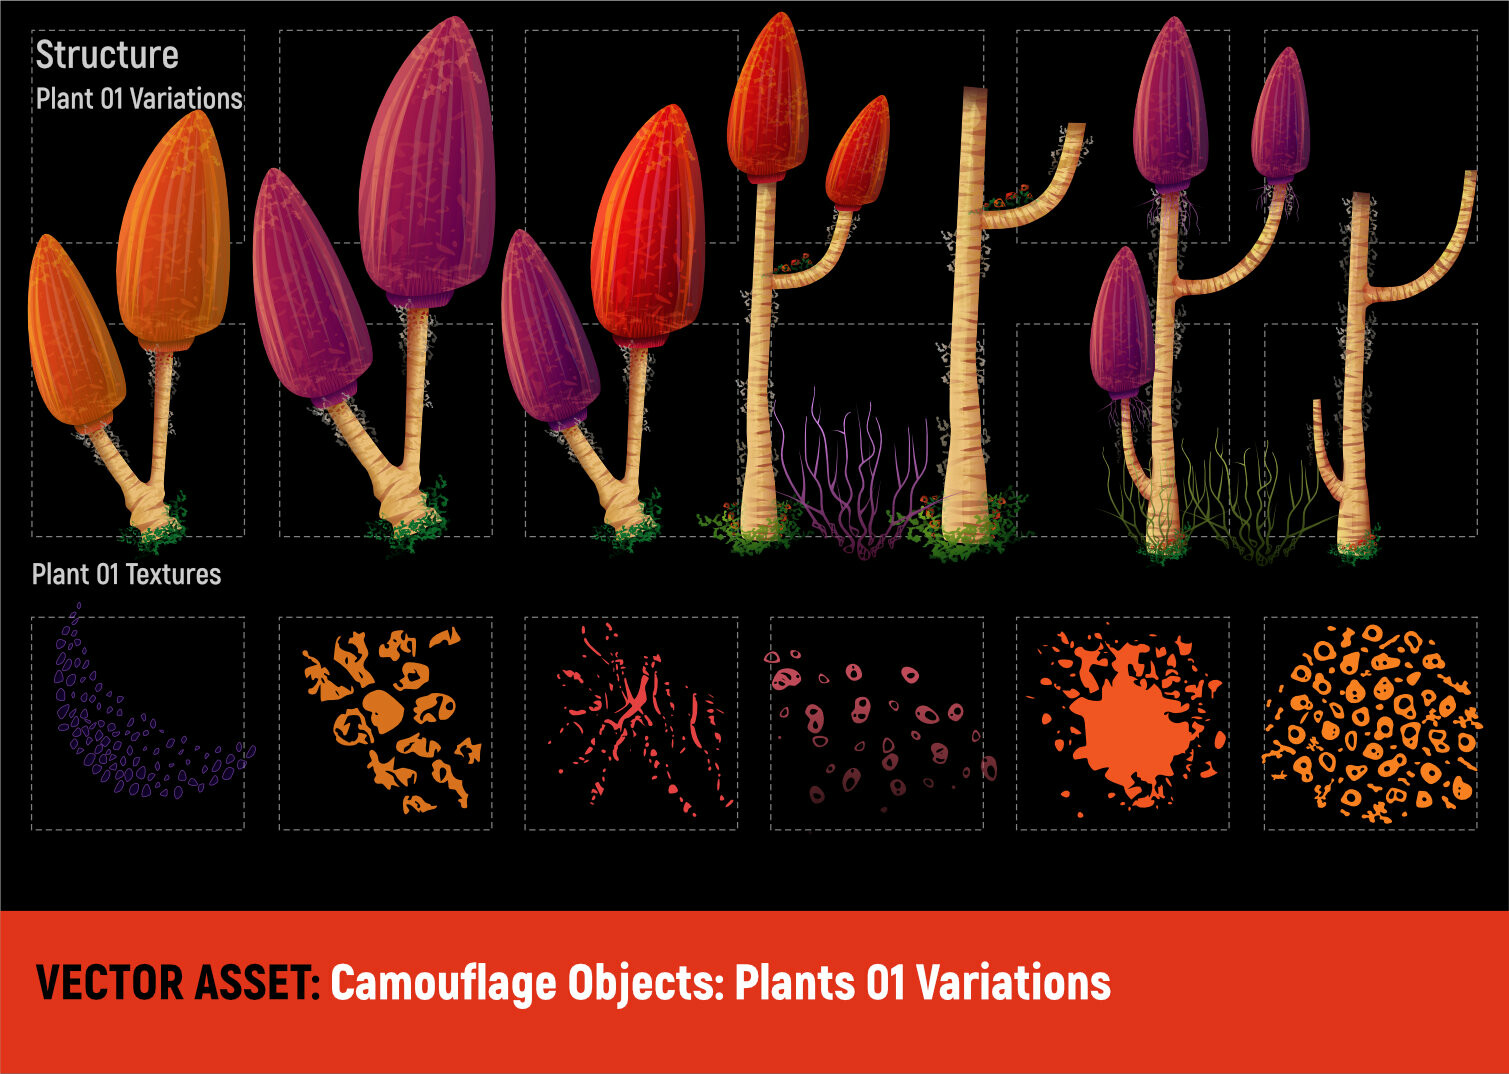 Vector Assets
Camouflage I Objects: Plants 01 Variations